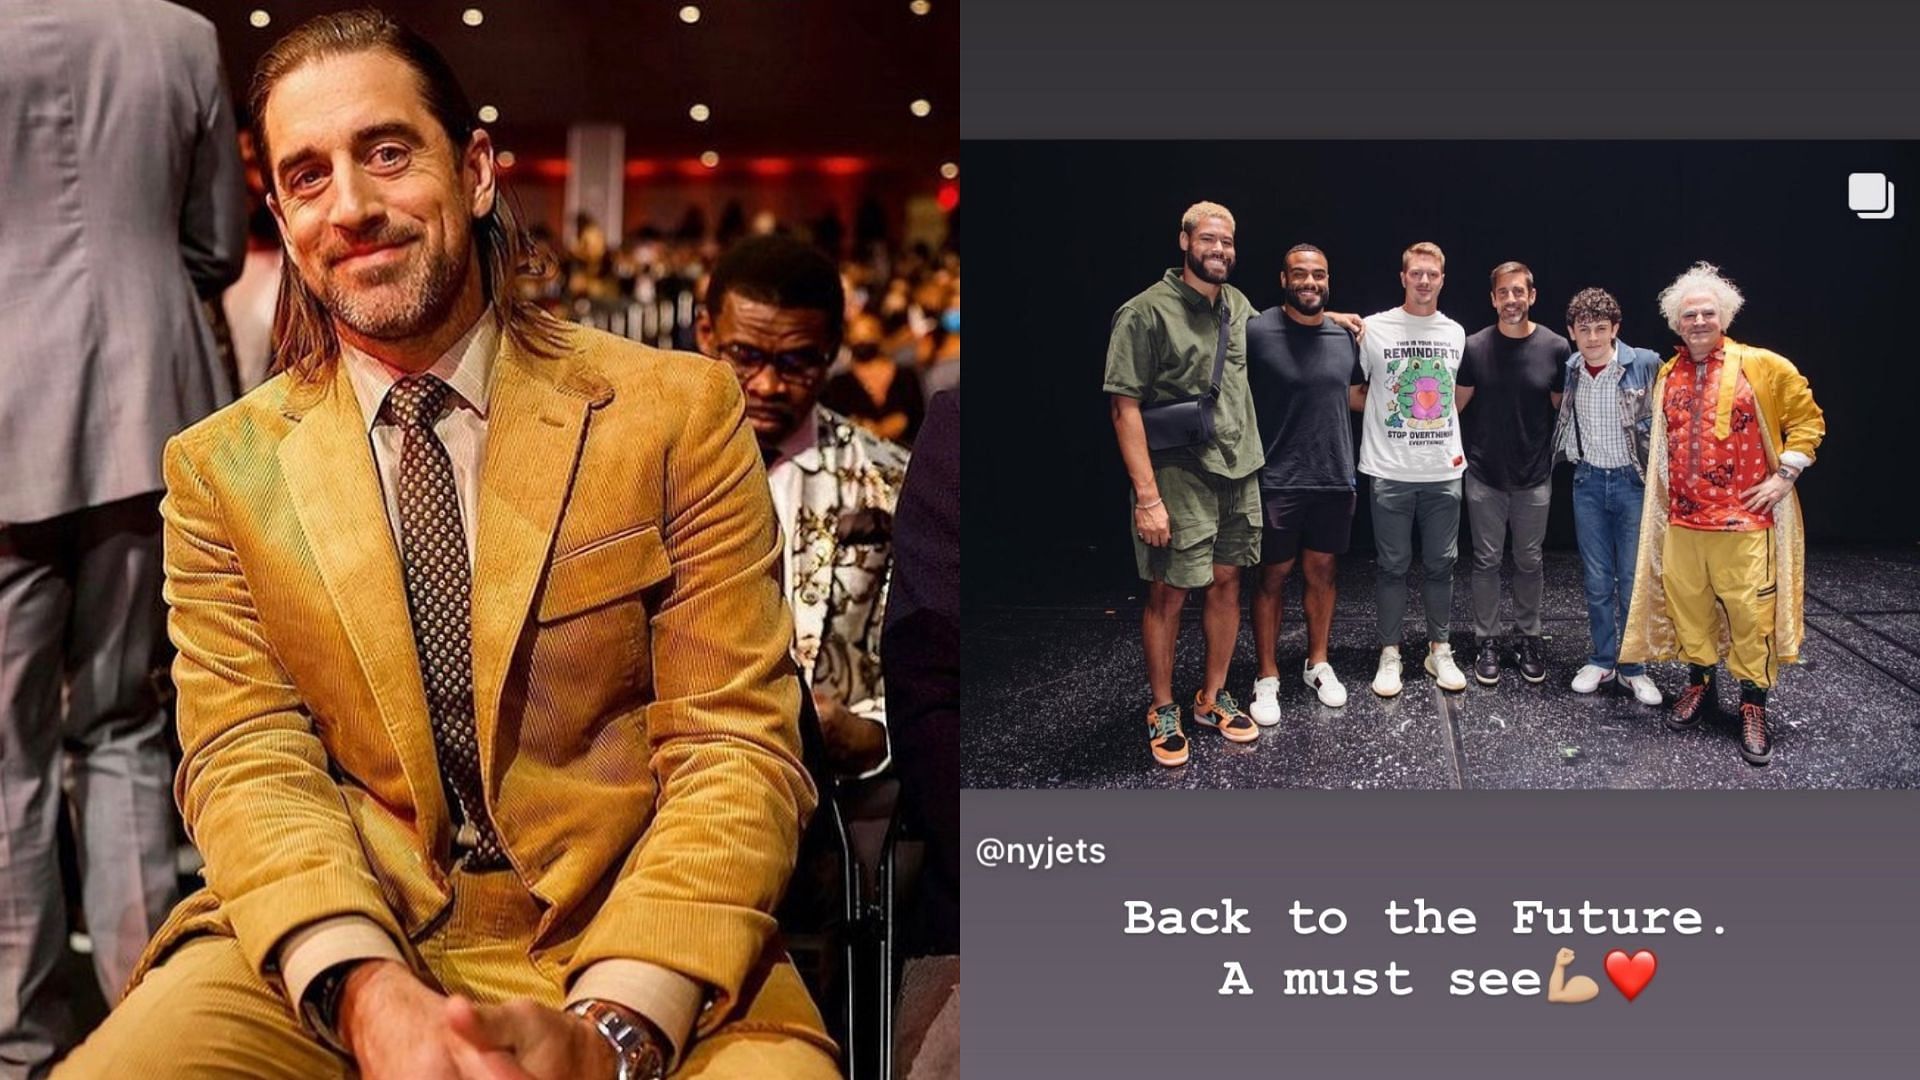 Aaron Rodgers attended Back to the Future: The Musical